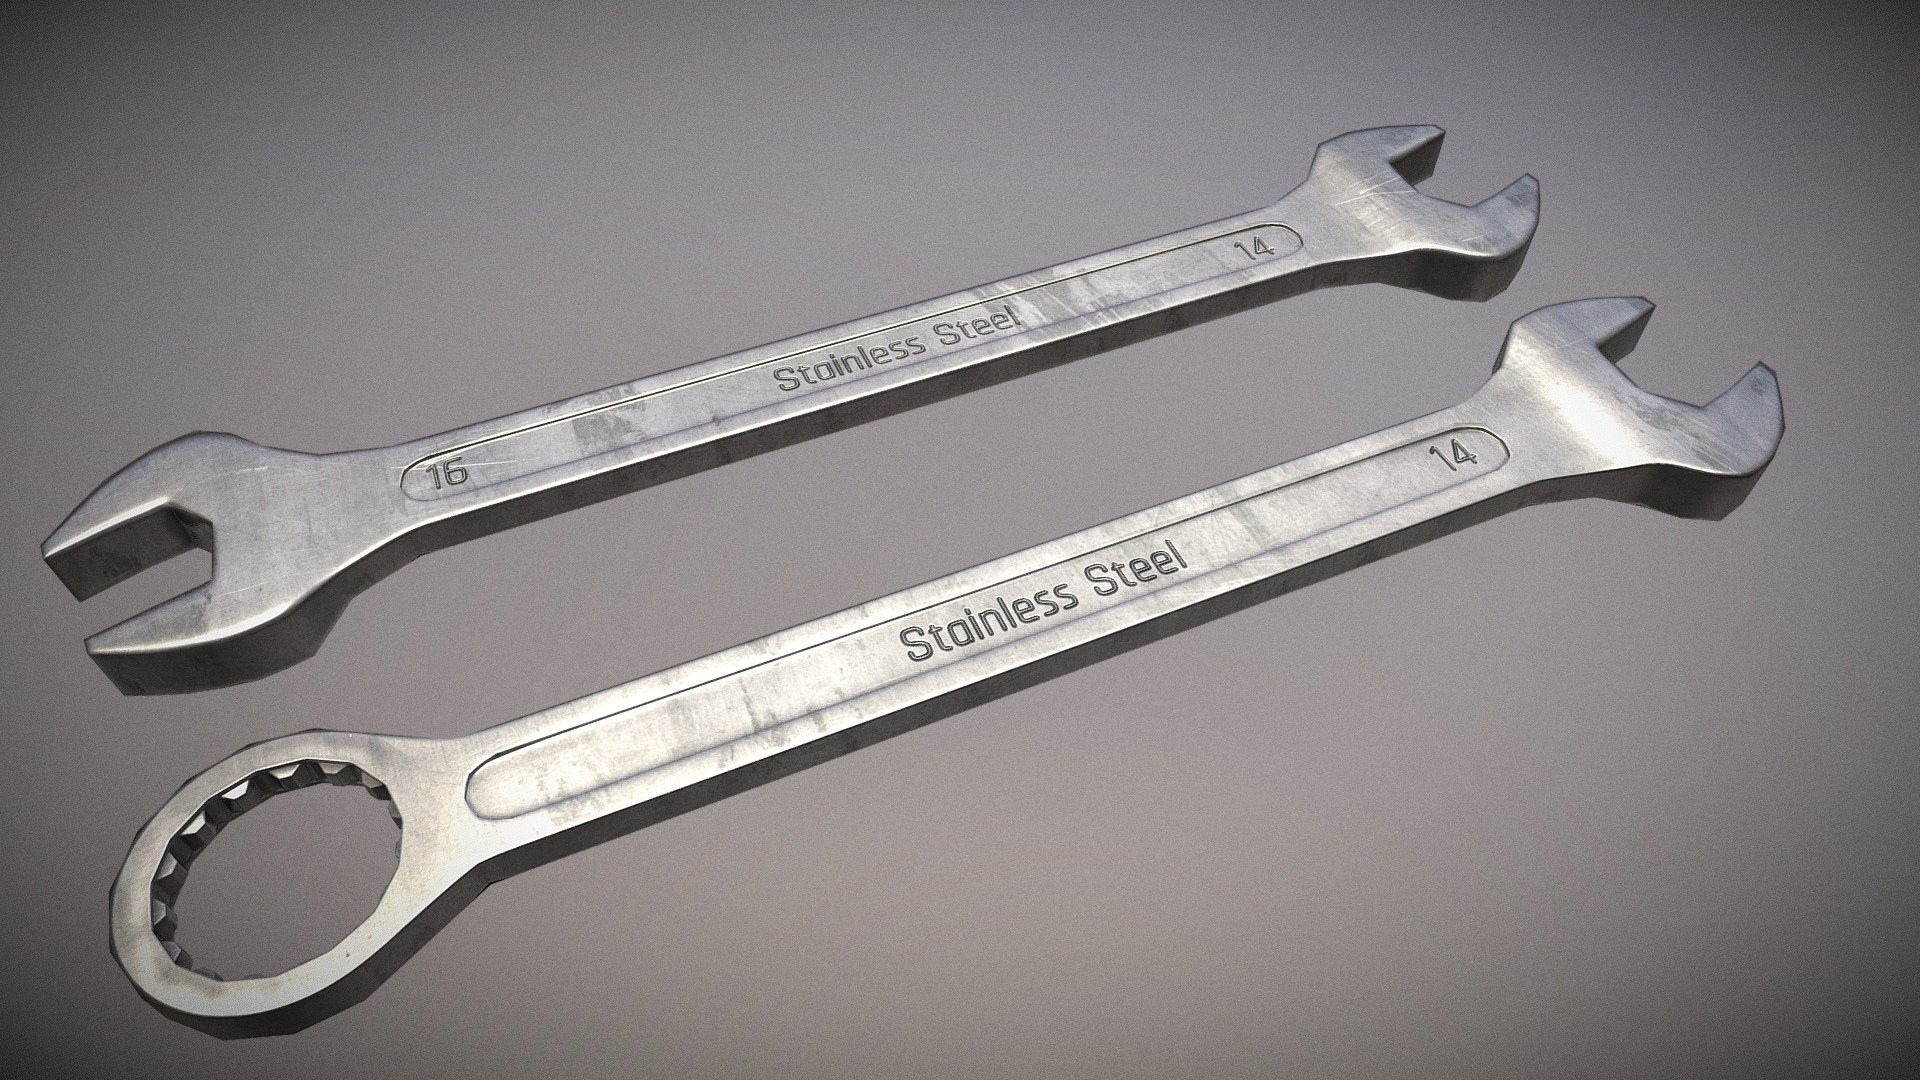 3D low-poly model of Stainless Steel Wrench Tool

A powerful adjustable wrench in powerful hands will fix anything!

PBR 4K texture set with AO effect. Can be used anywhere you need 3d model